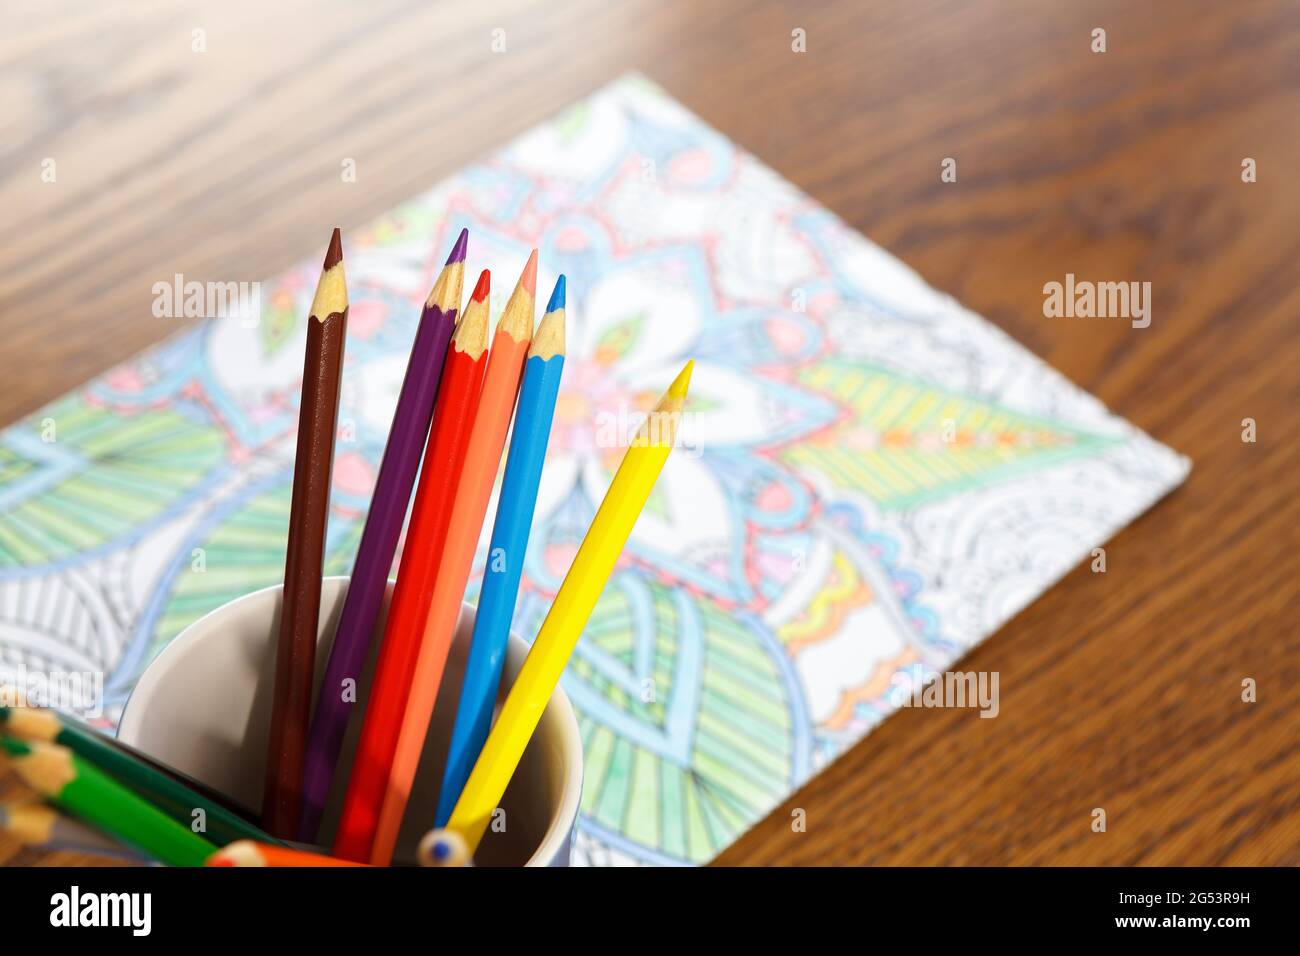 https://c8.alamy.com/comp/2G53R9H/adult-coloring-book-and-crayons-on-the-table-2G53R9H.jpg